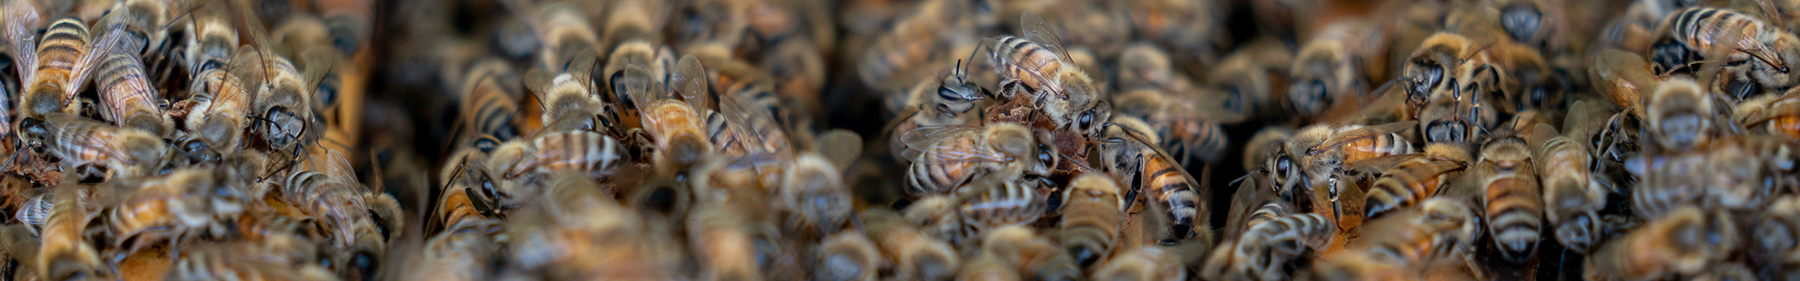 Very close image of bees in a hive